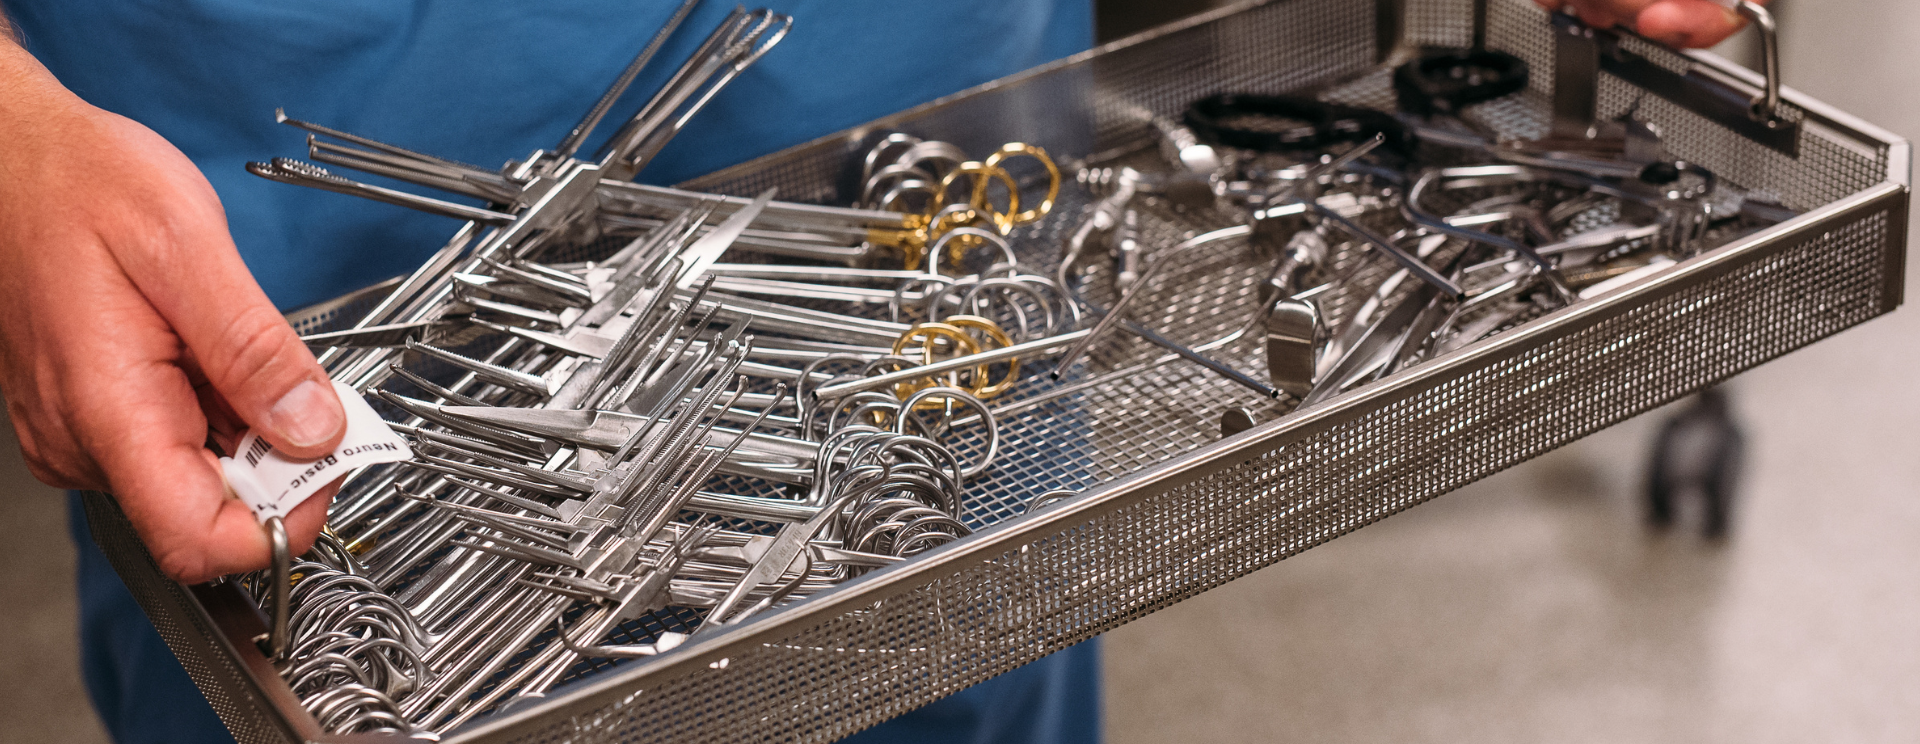 Recognizing when devices & instruments should be cleaned in sterile processing